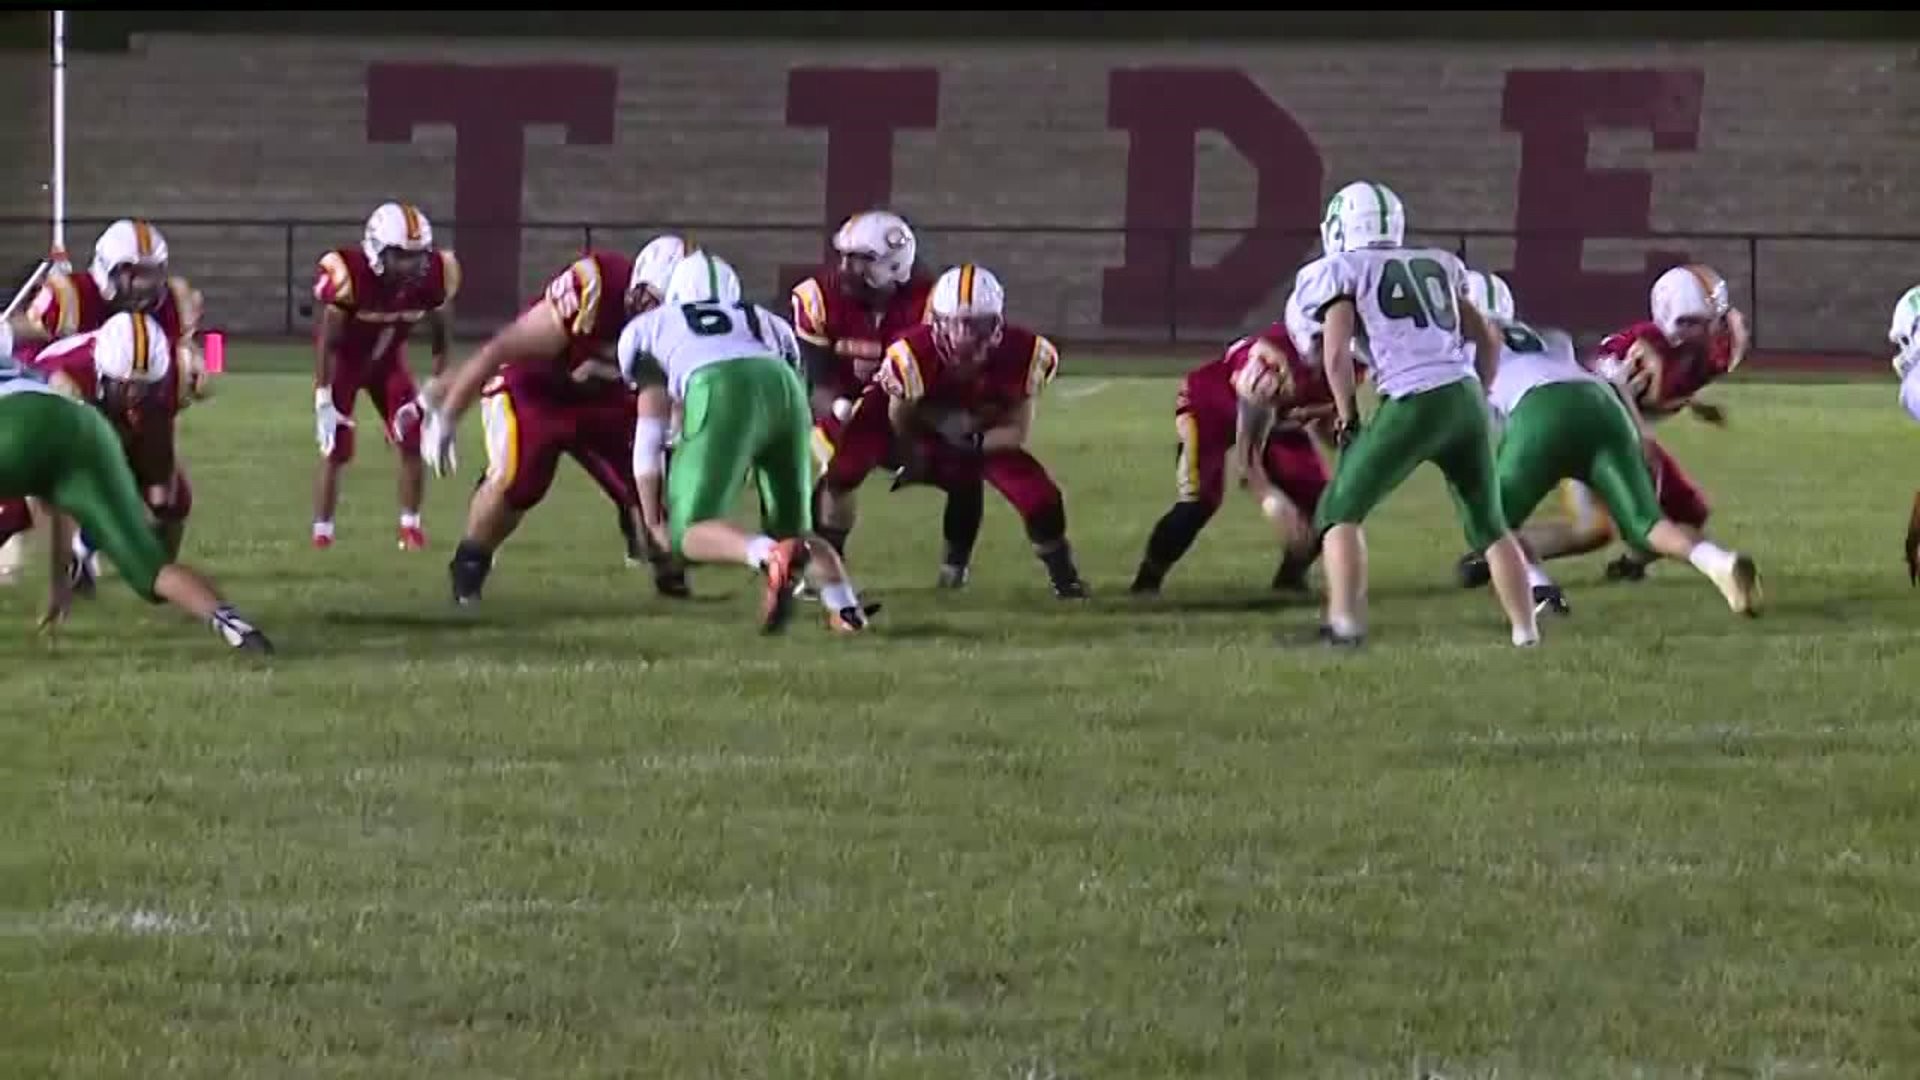 HSFF week 4 Donegal at Columbia highlights